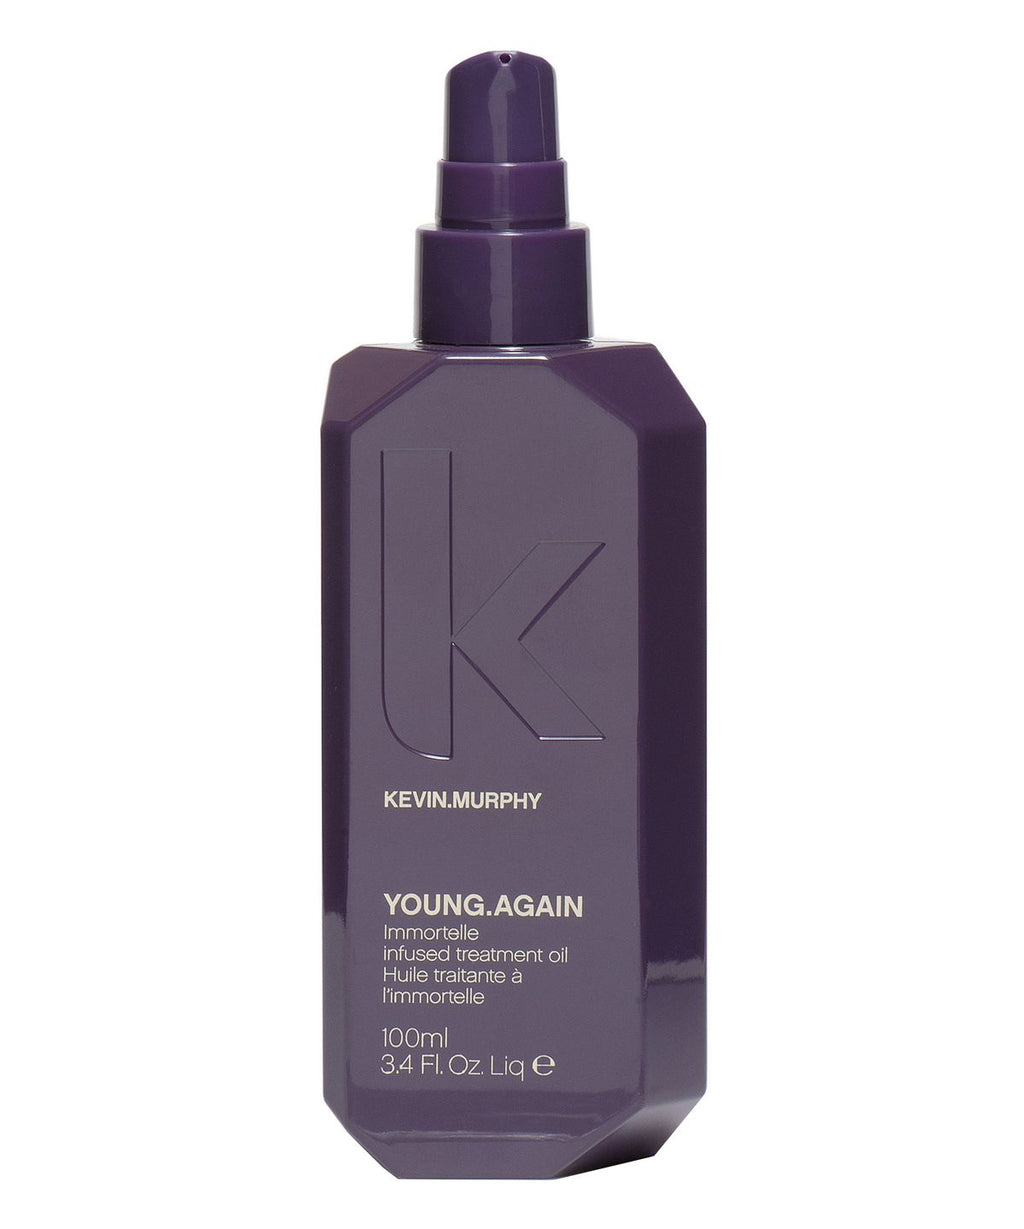 Kevin Murphy Young Again Oil Immortelle infused treatment oil 100ml